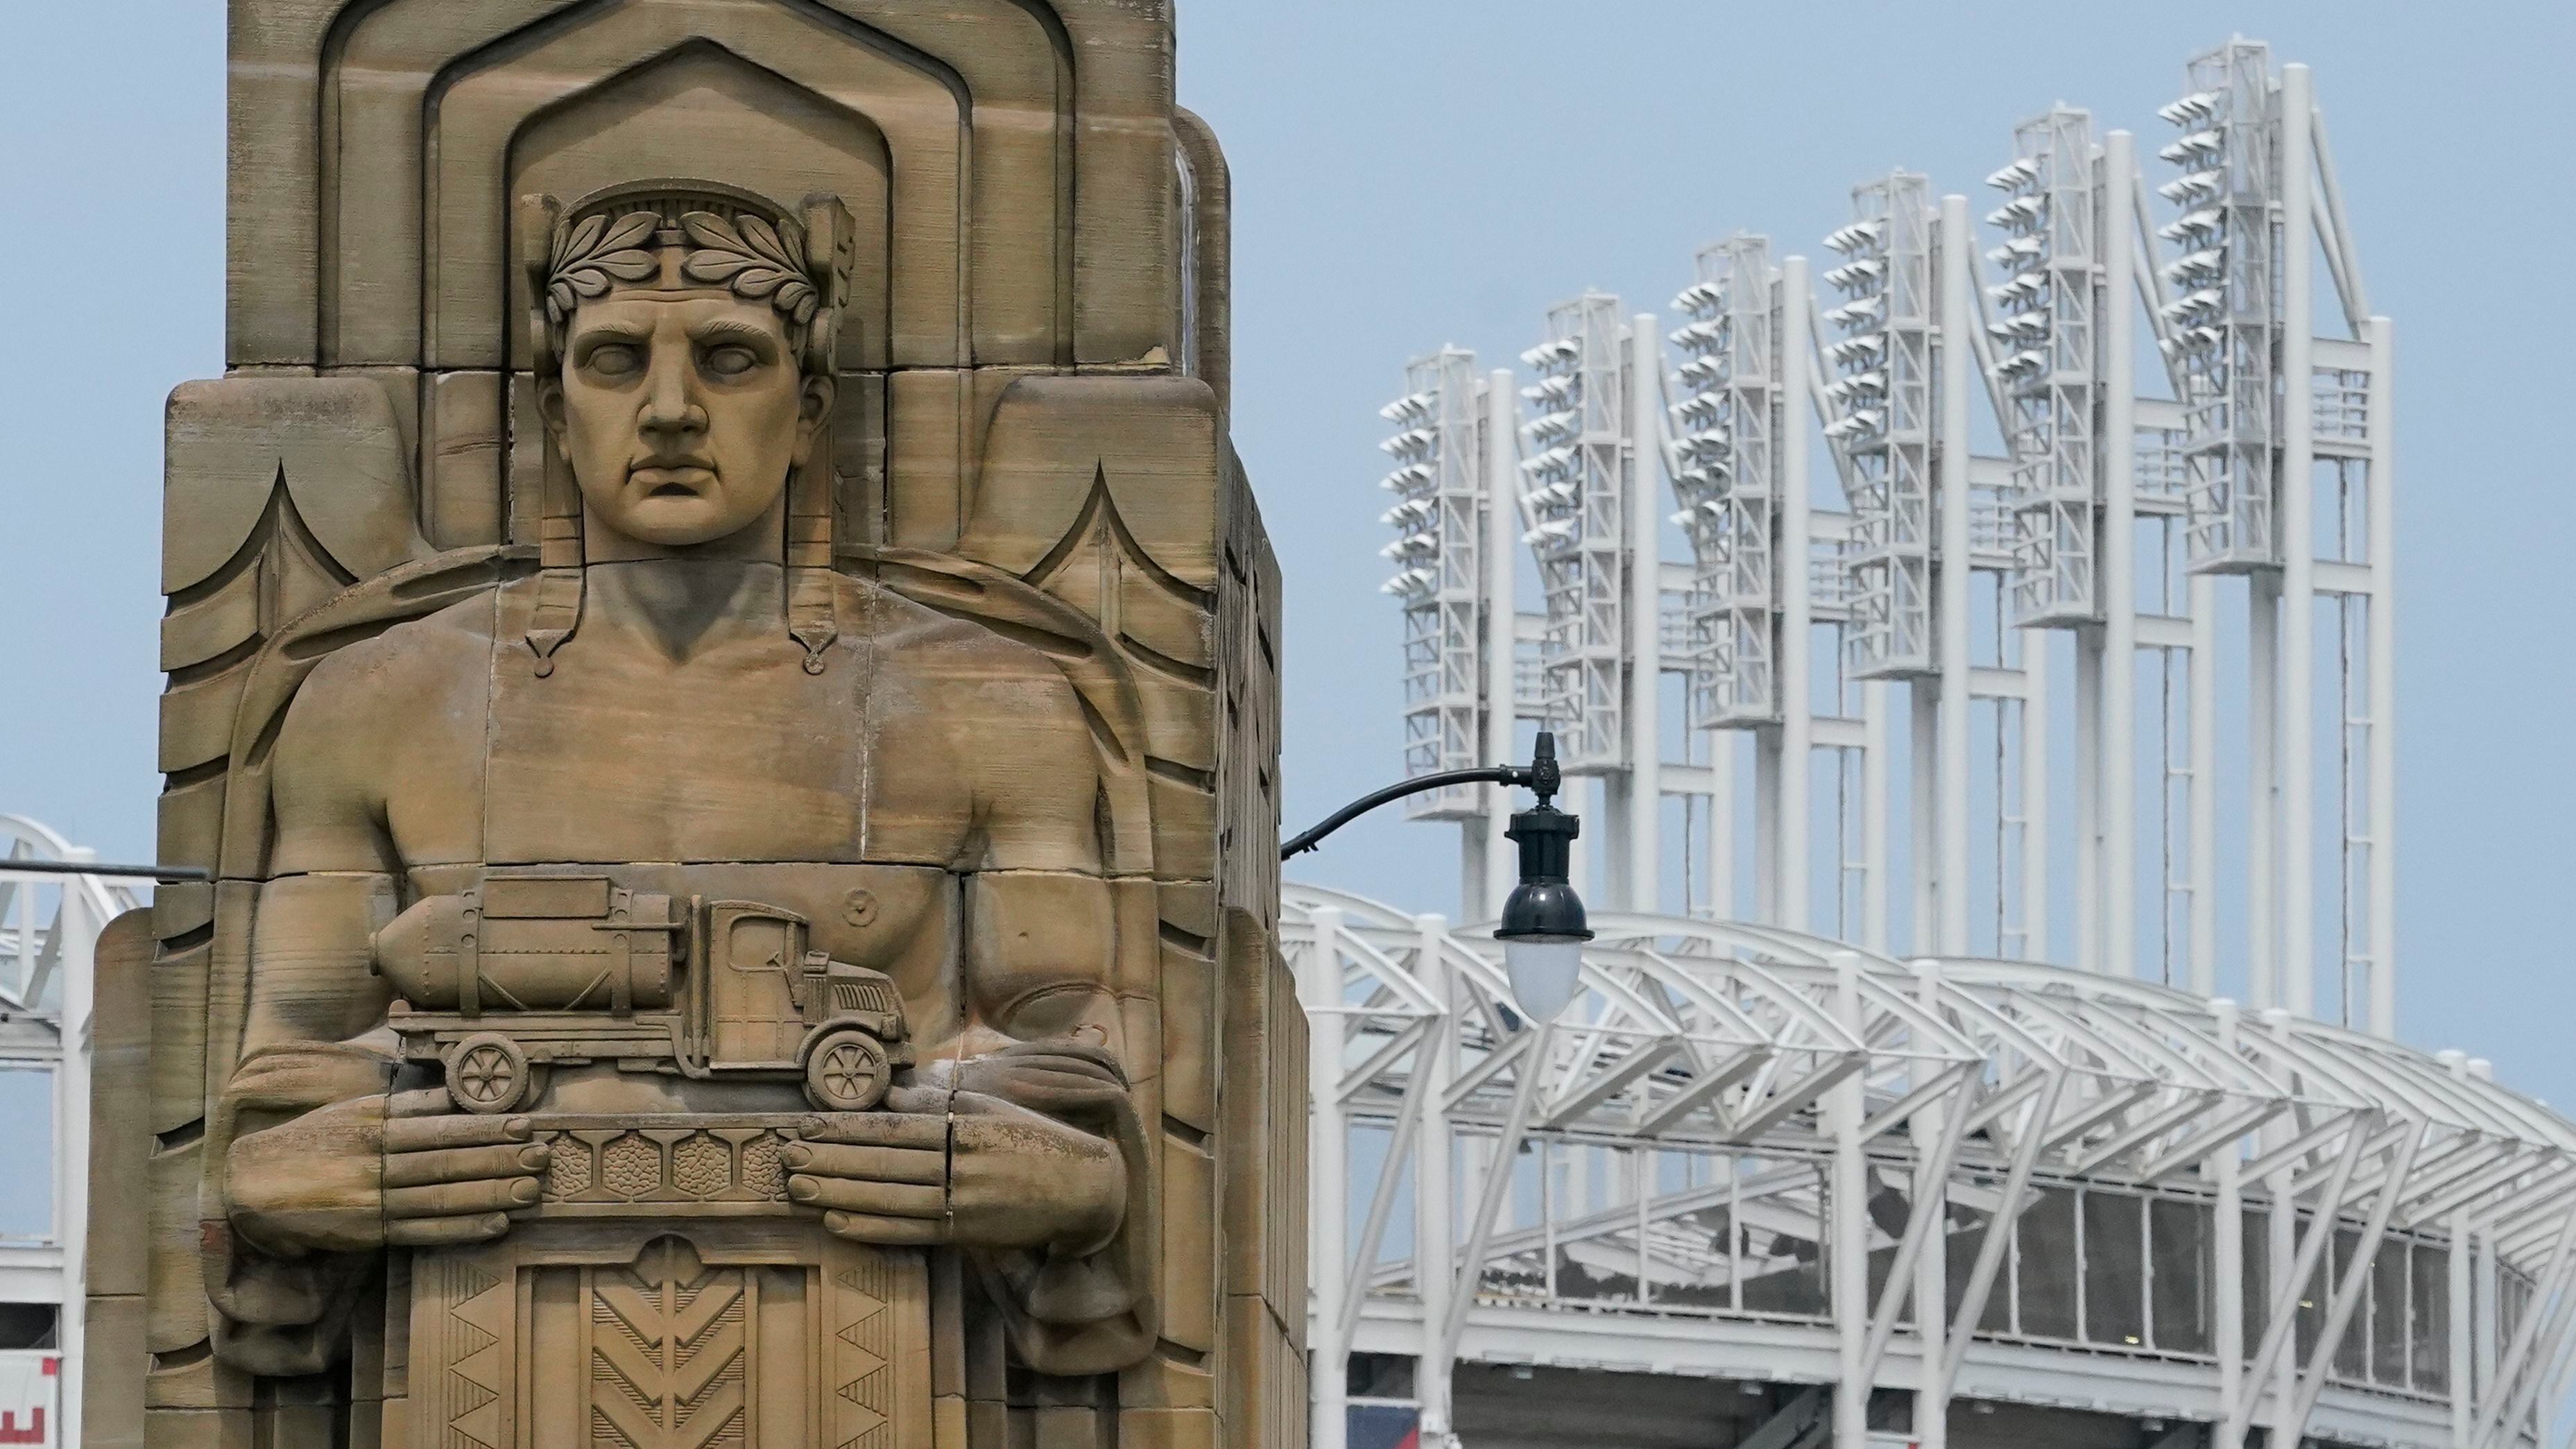 Why Guardians? The history behind Cleveland baseball's new name